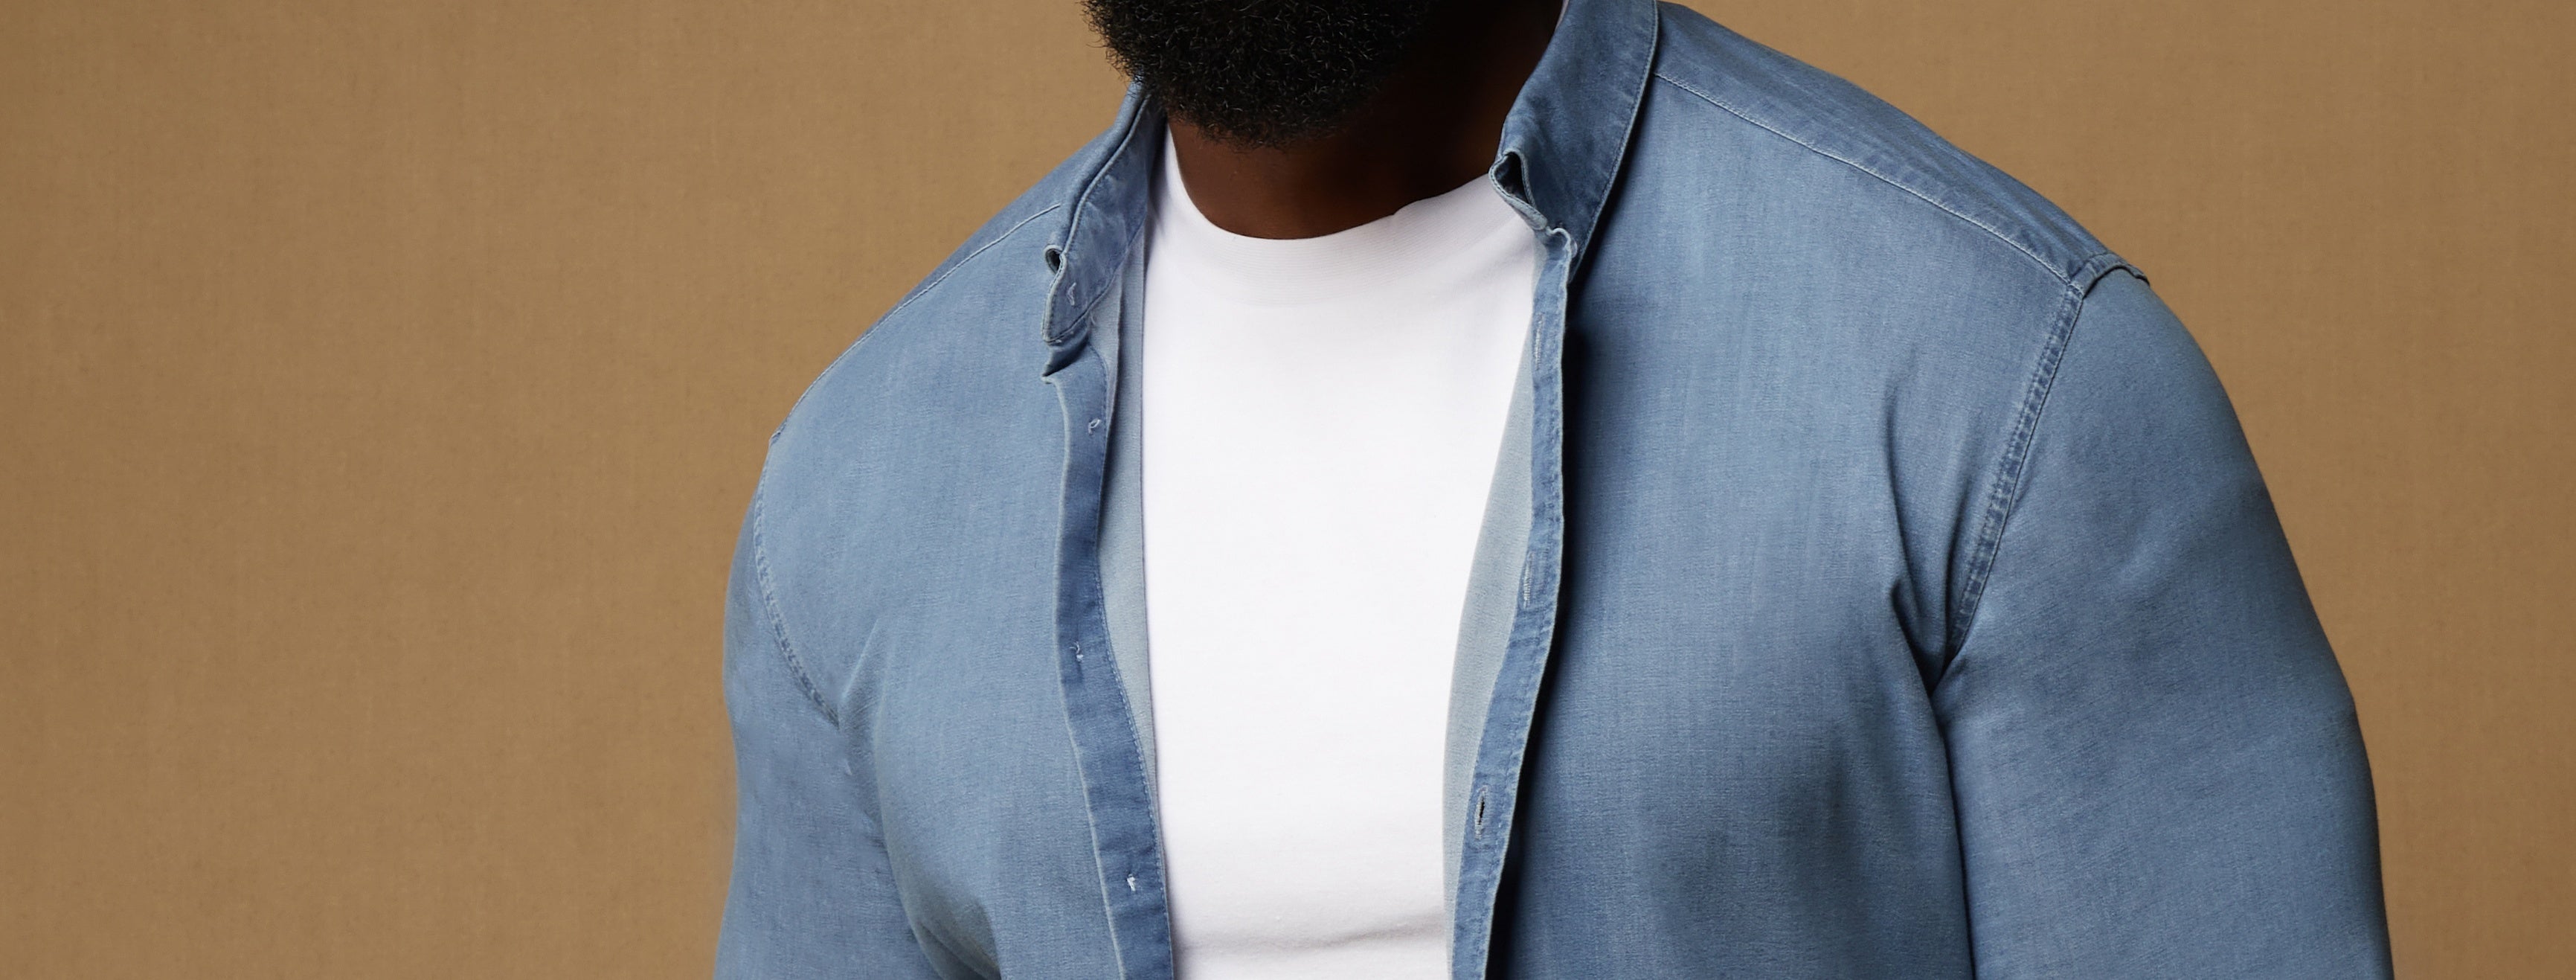 http://taperedmenswear.com/cdn/shop/articles/How_to_Make_a_Shirt_Fitted_Without_Sewing.jpg?v=1689942681